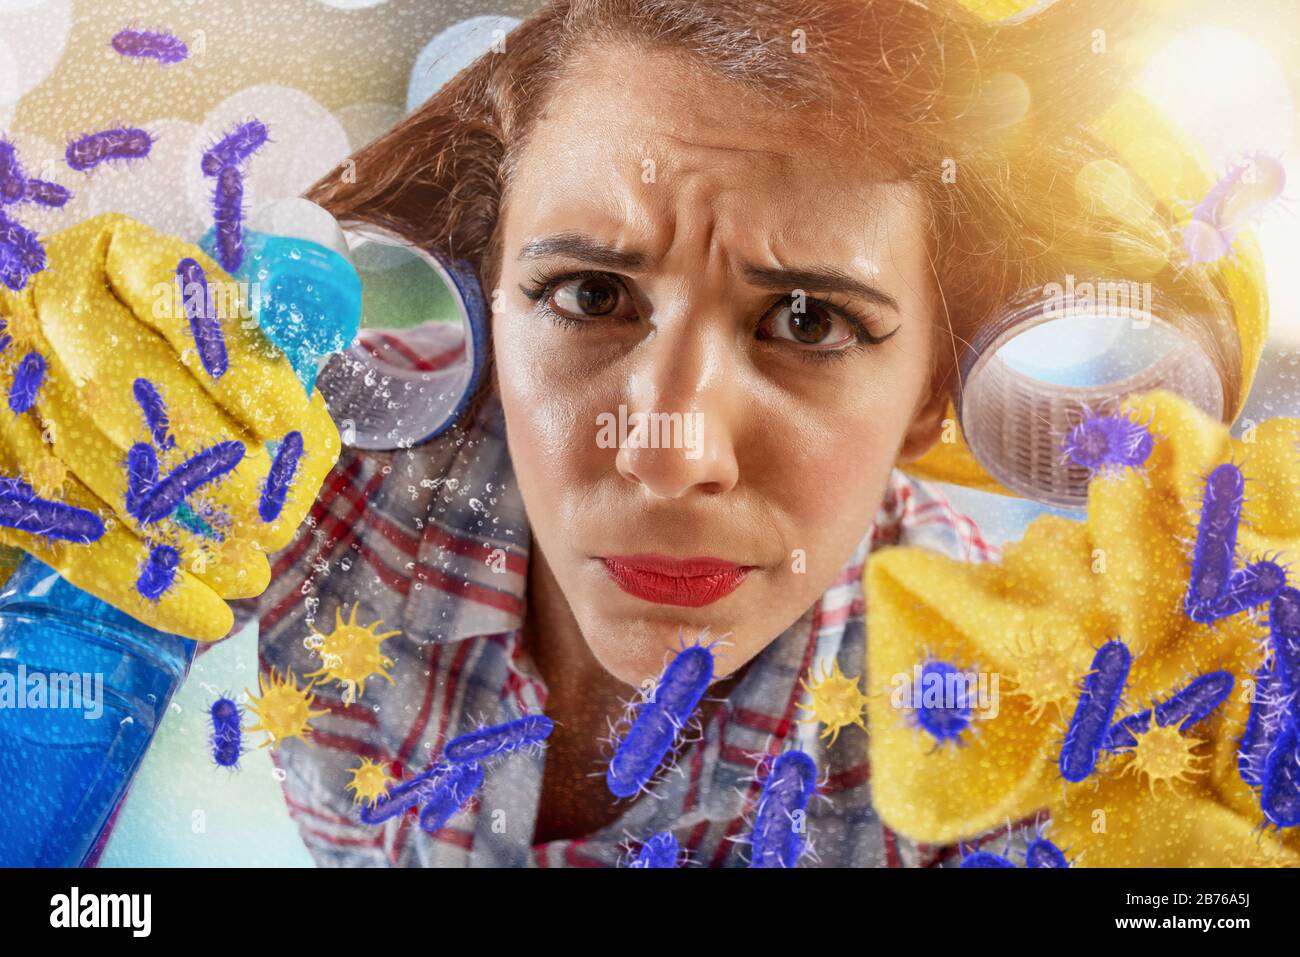 Funny housewife cleans and disinfects to keep germs, viruses and bacteria away. Stock Photo